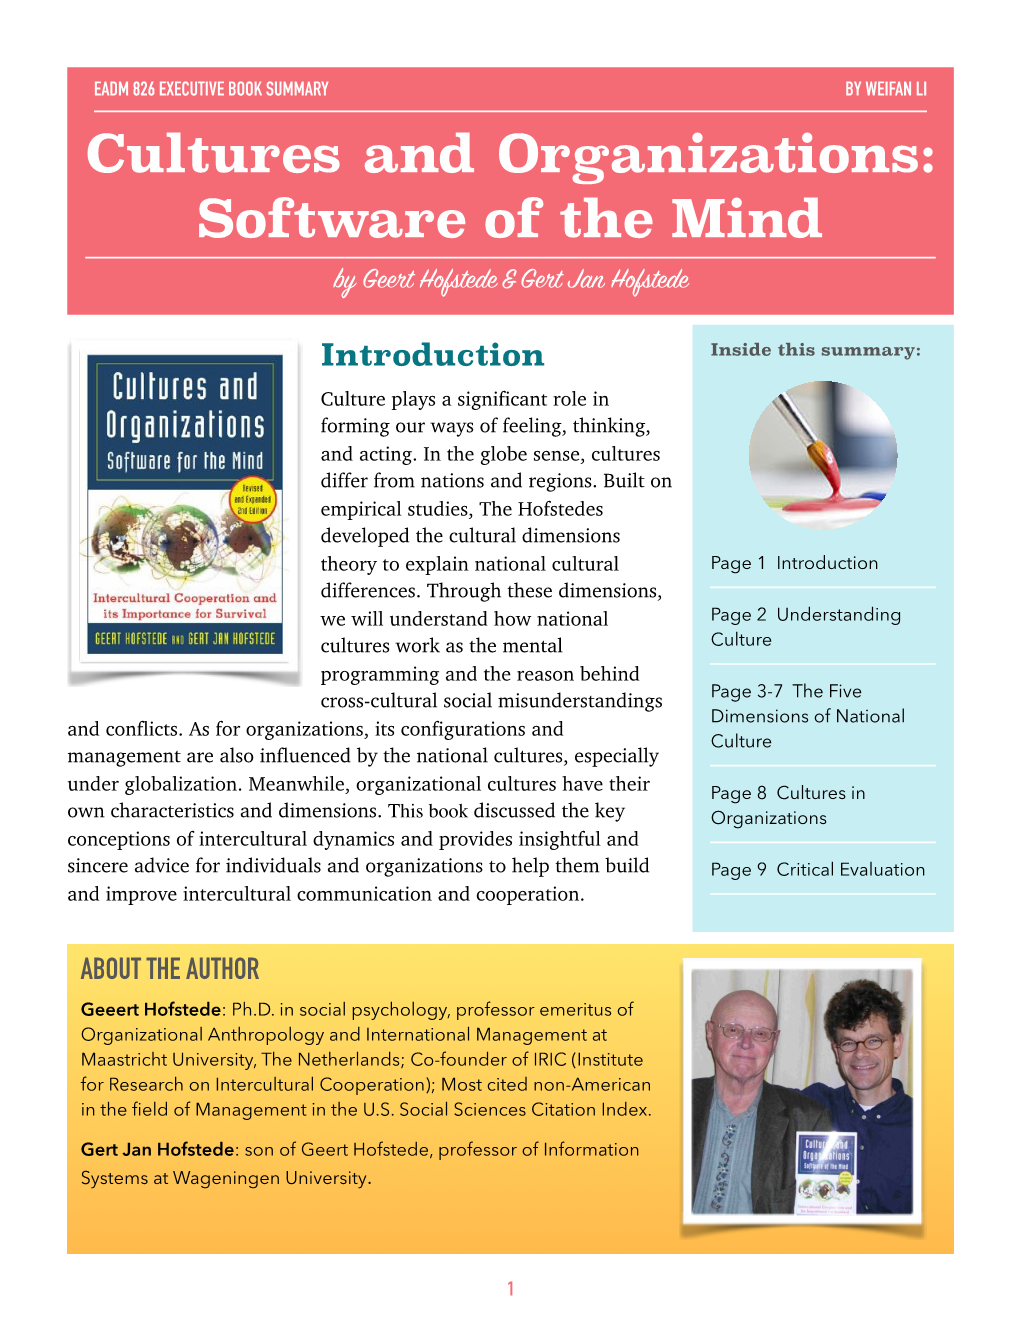 Cultures and Organizations: Software of the Mind by Geet Hofstede & Get Jan Hofstede